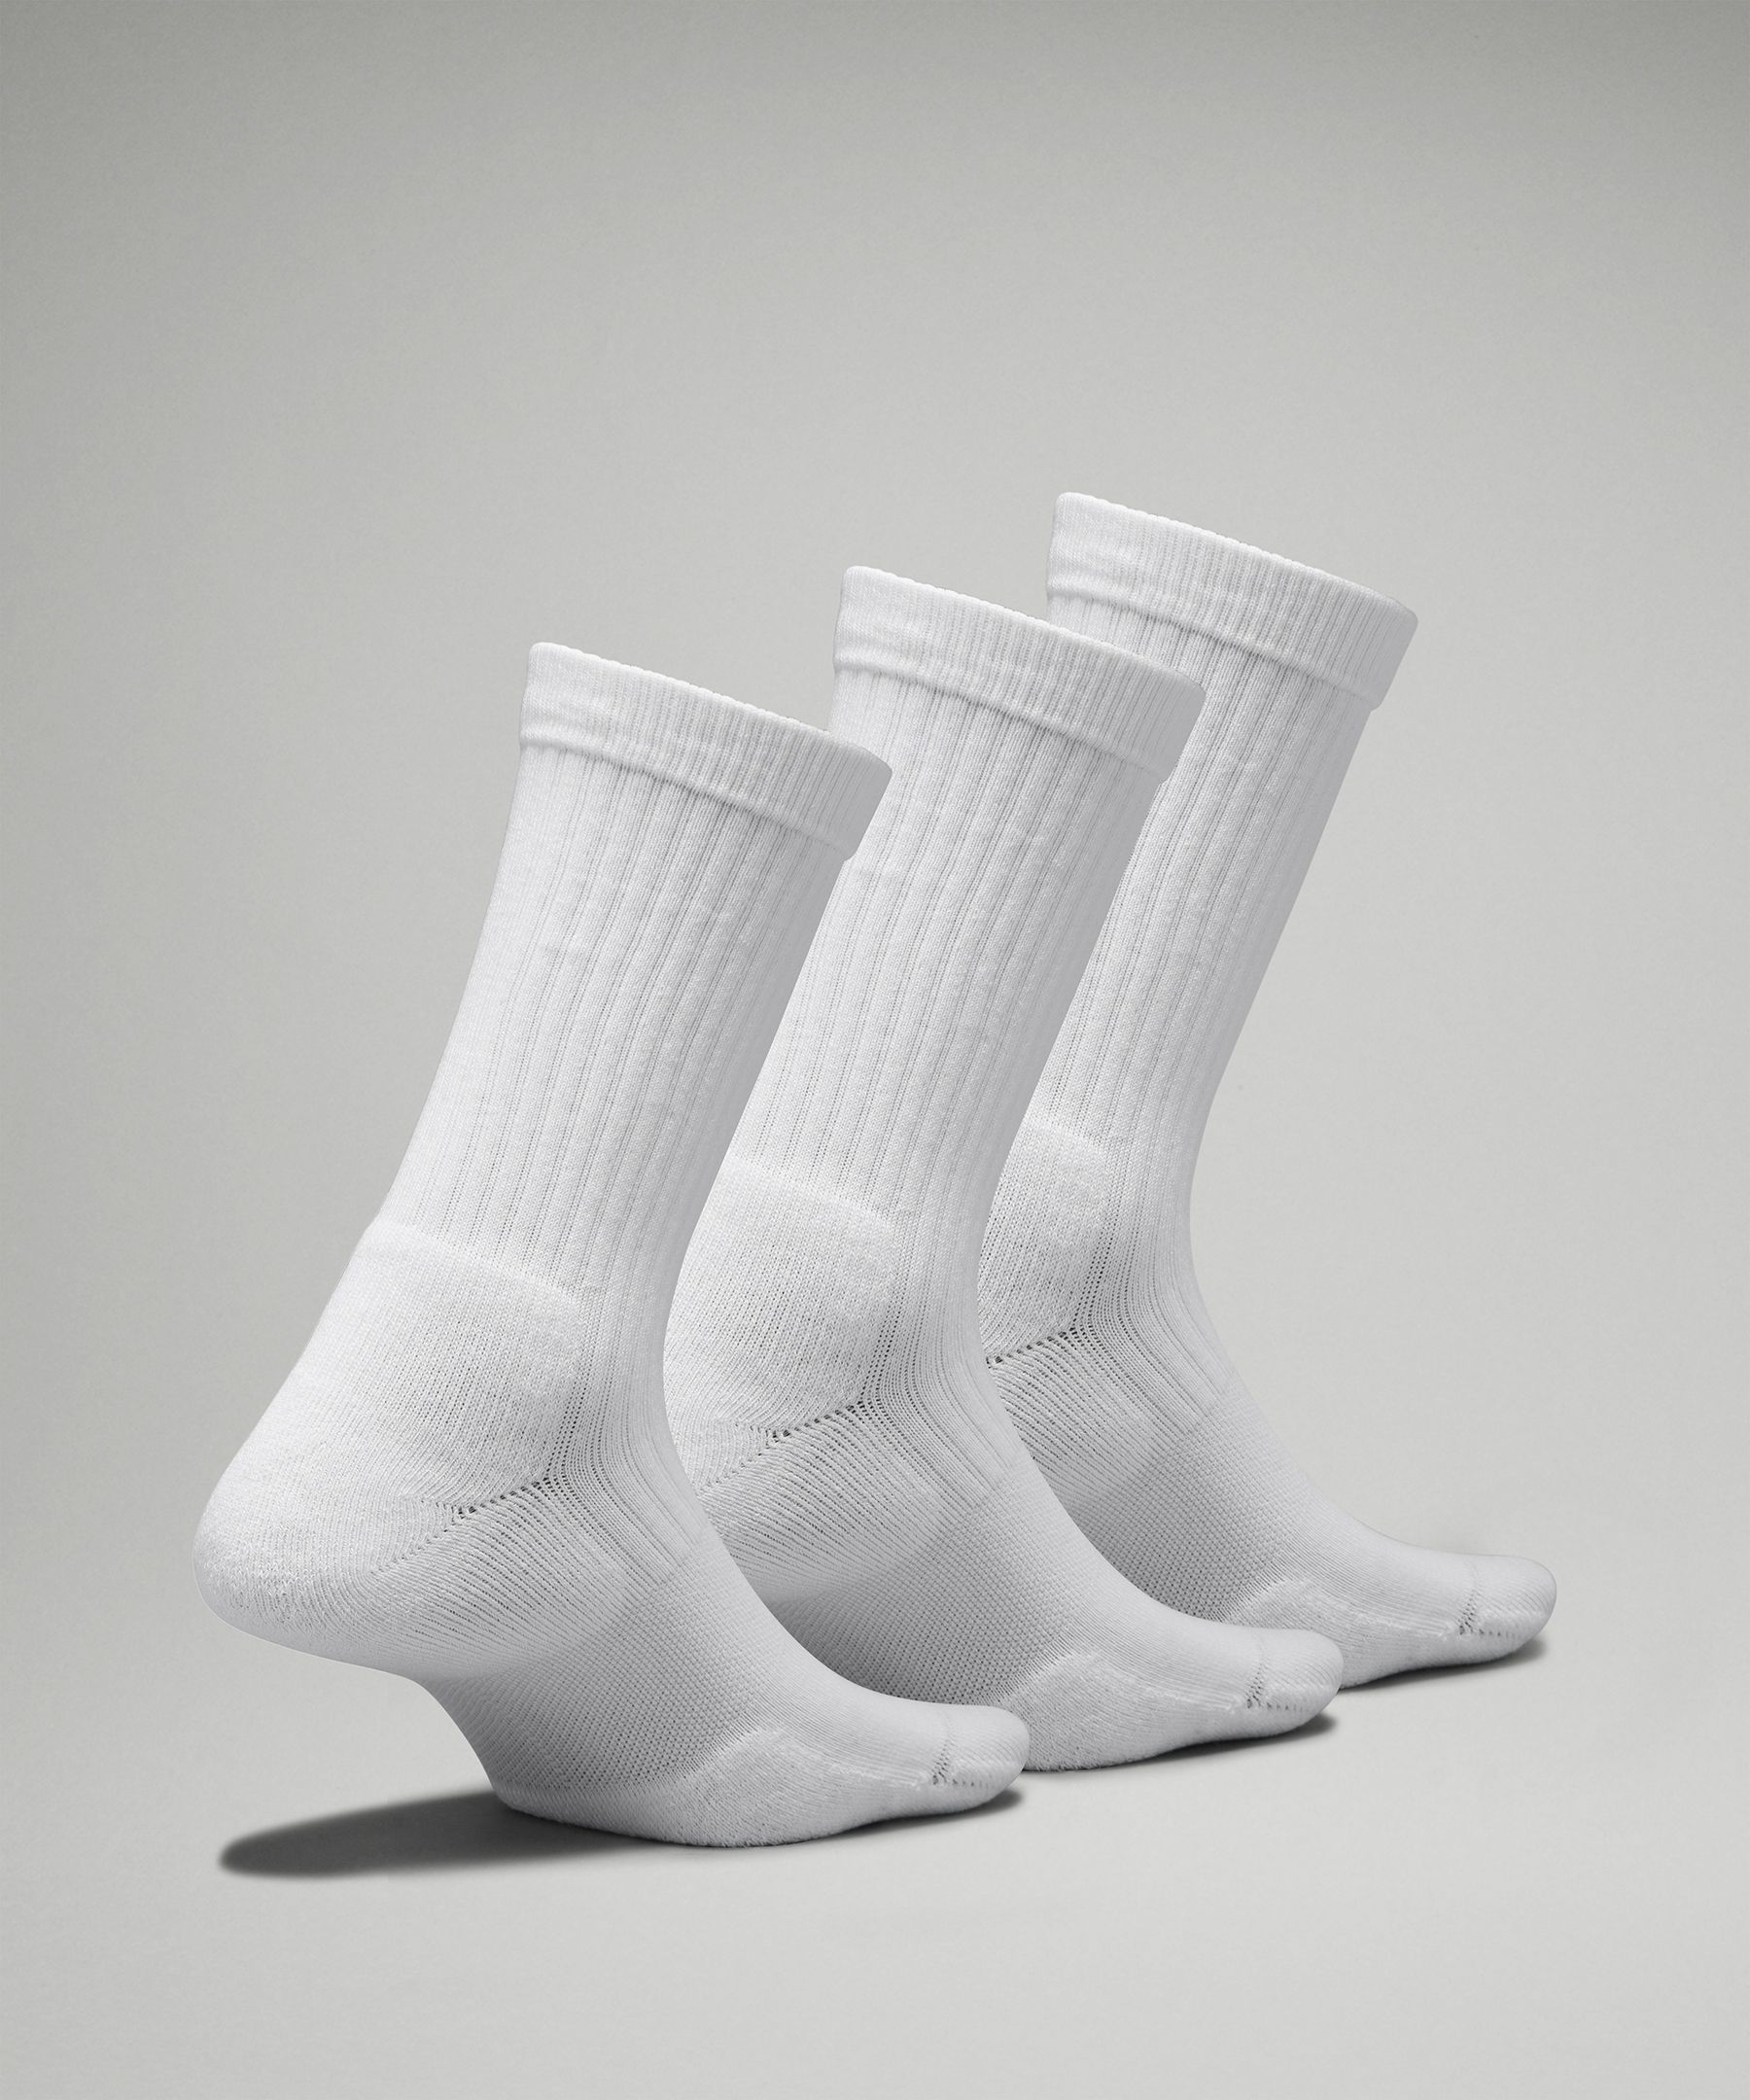 No Nonsense Casual Complete Comfort Socks, White, Size 4-10, 3 Ct (2 pack),  2 - Foods Co.